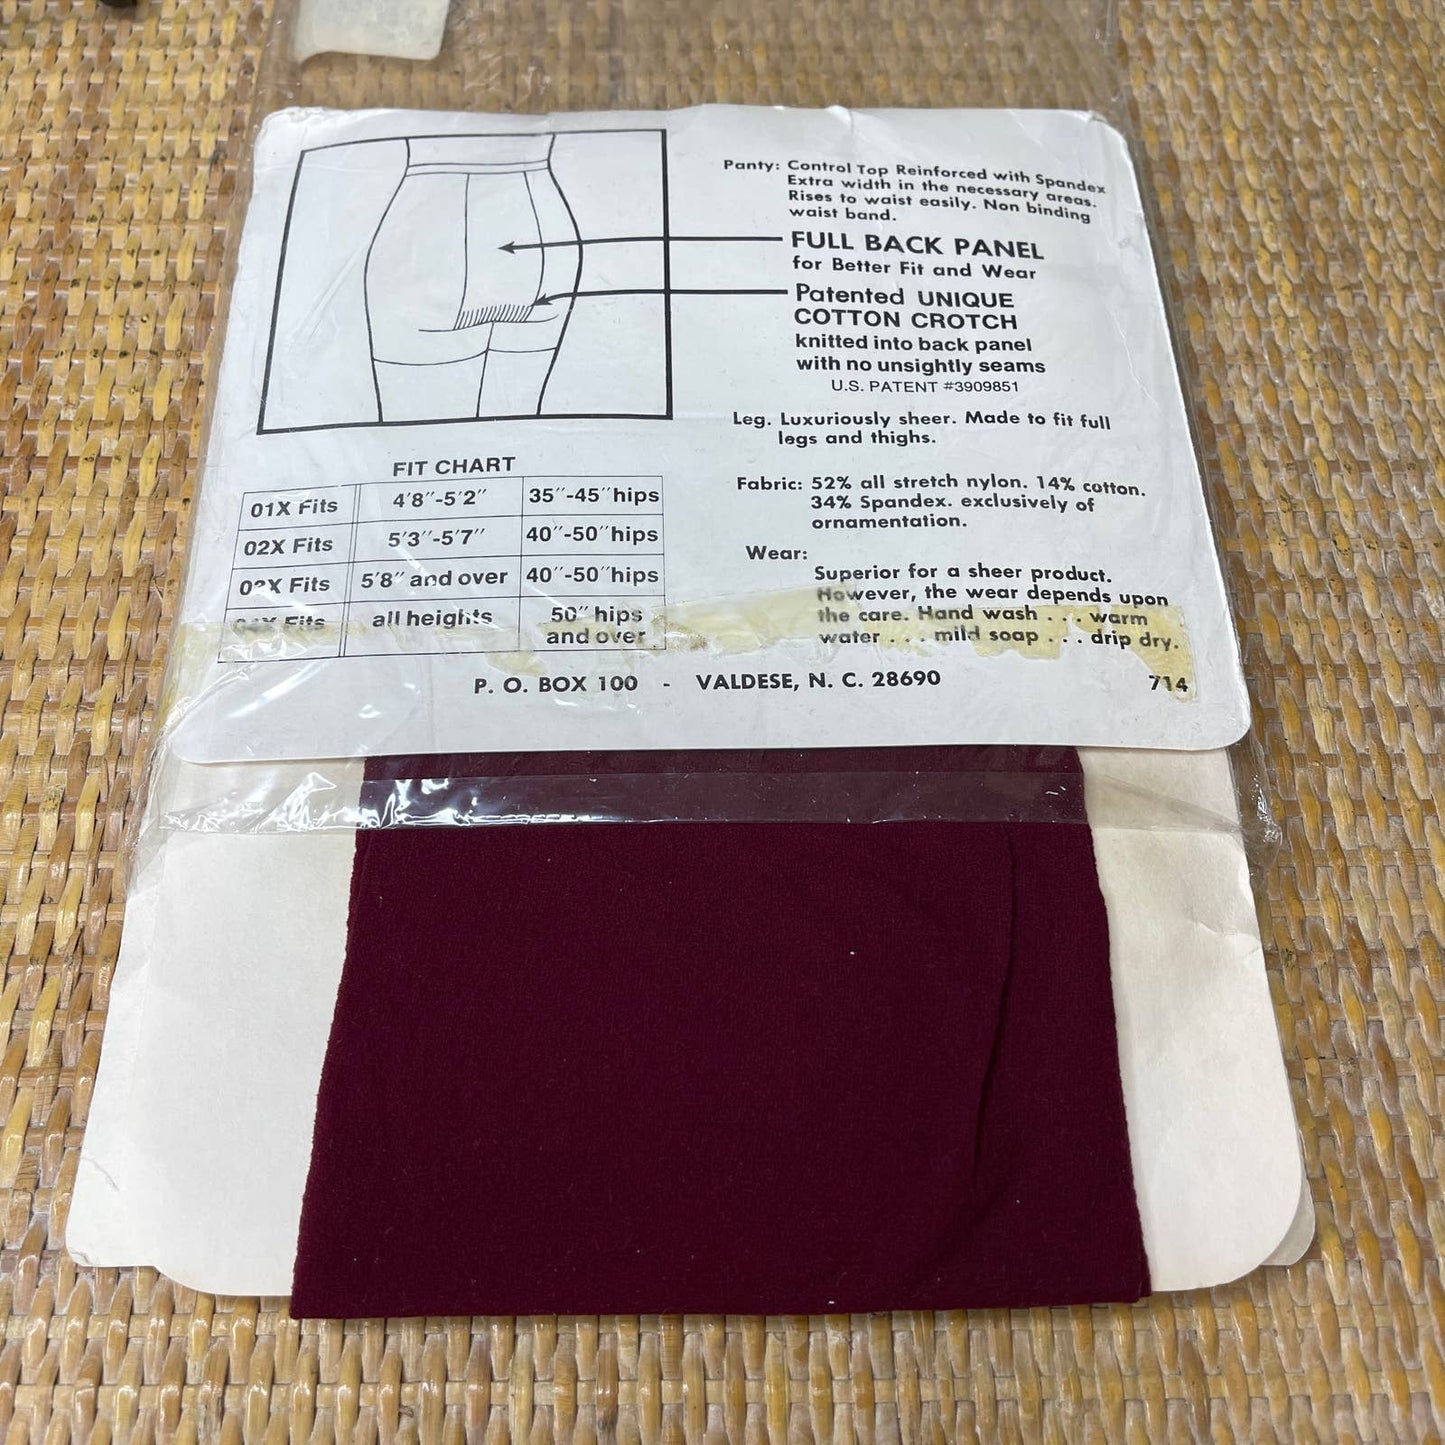 Vintage Burgundy Control Top Pantyhose Extra Width JCPenney Size 4X